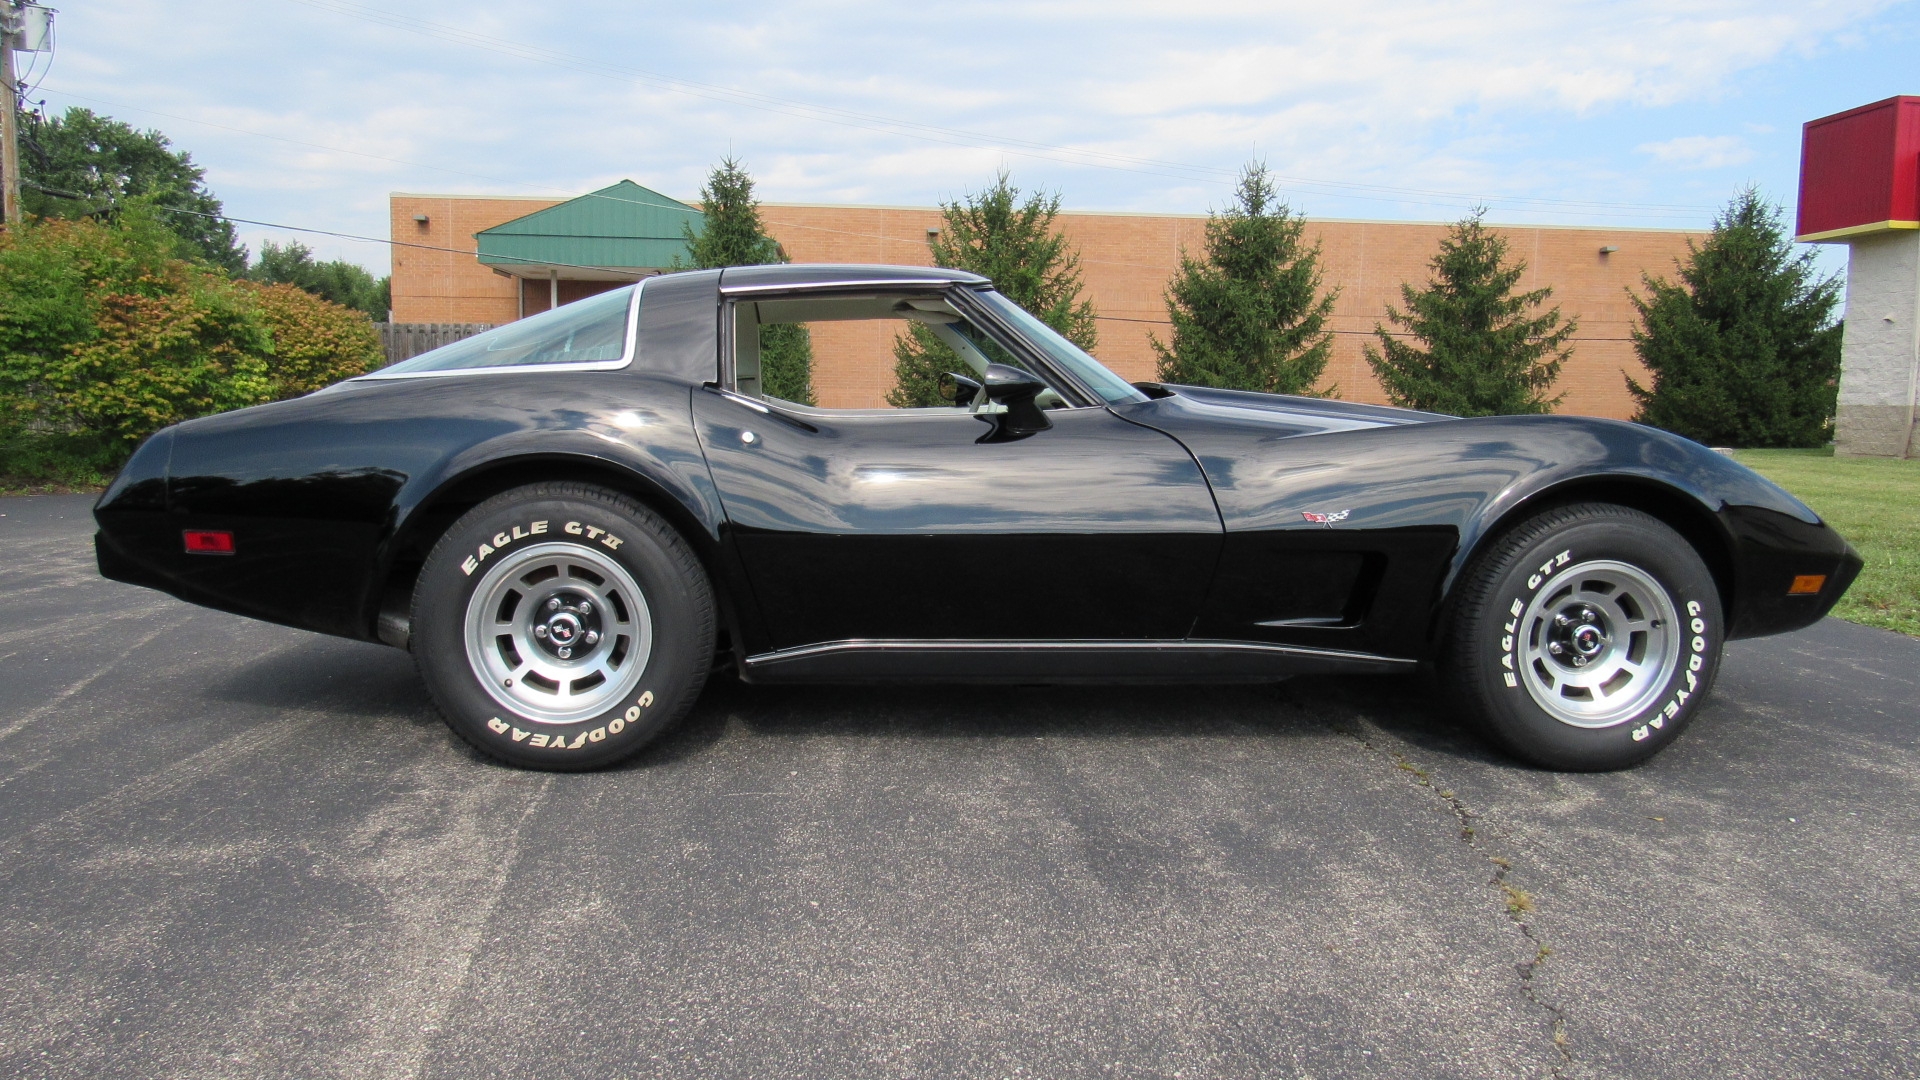 1978 Corvette, Black/Oyster, Auto, 2 Owners, SOLD!